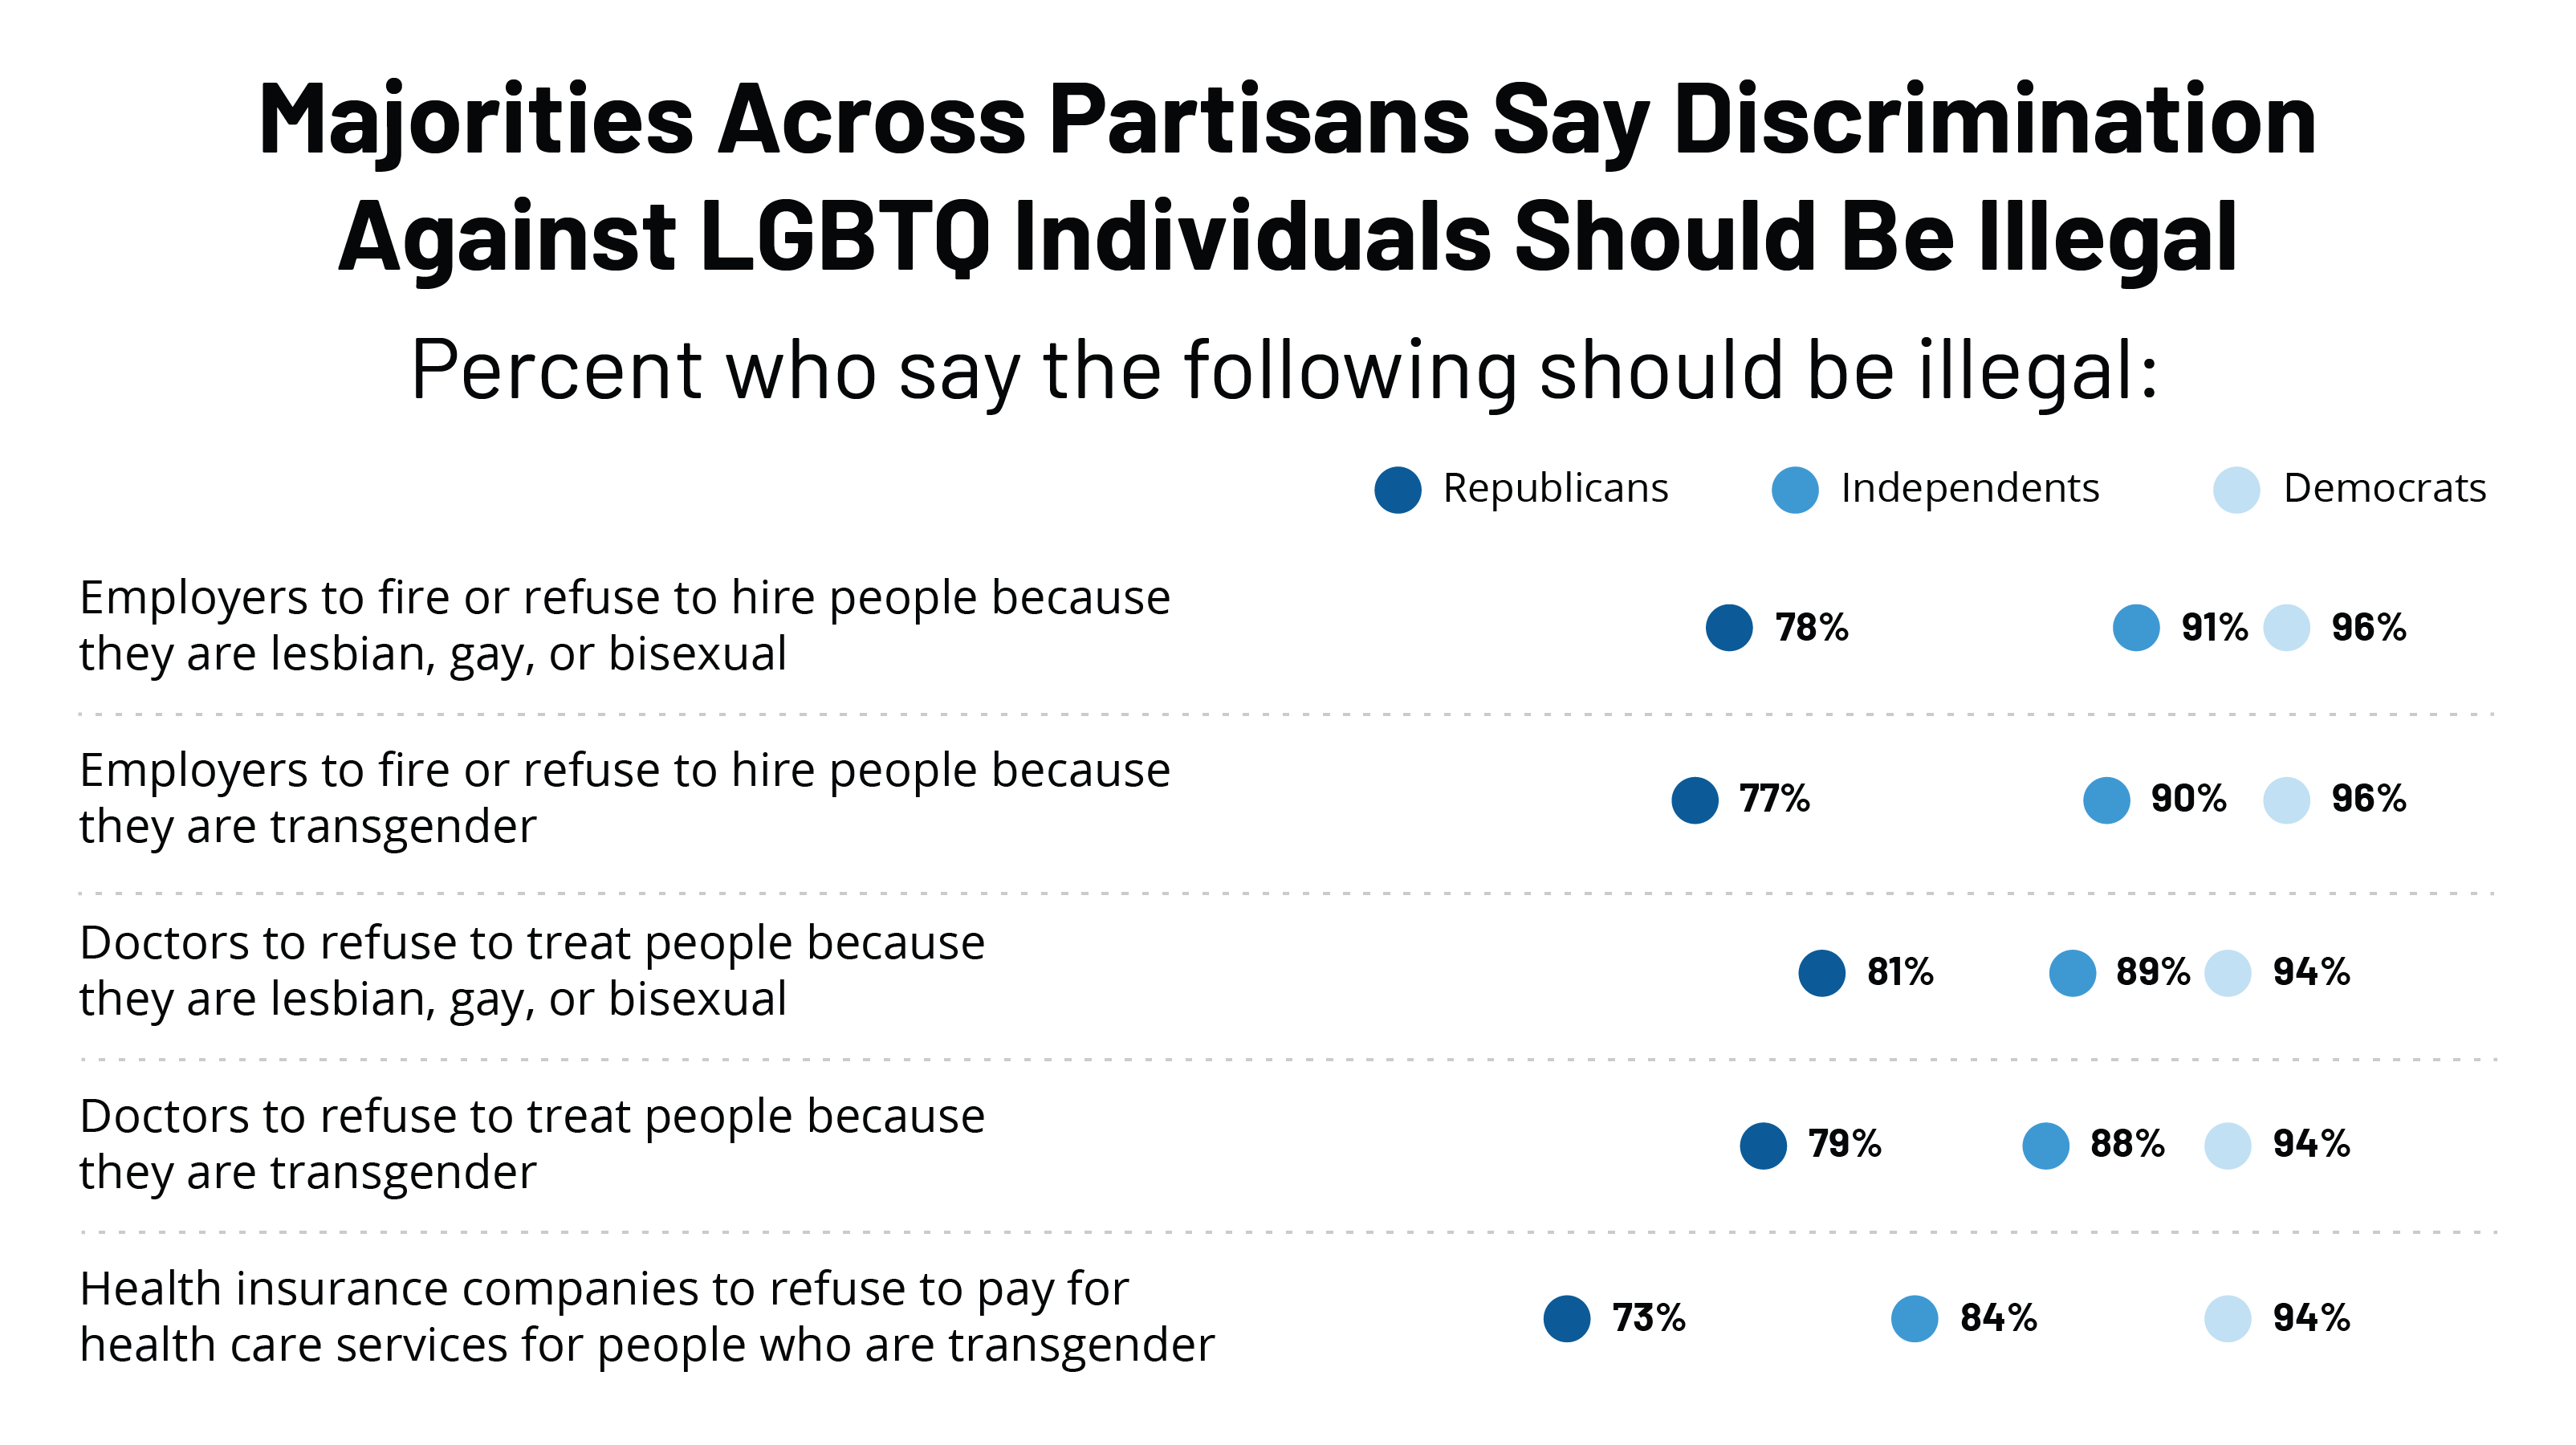 Poll Large Majorities Including Republicans Oppose Discrimination